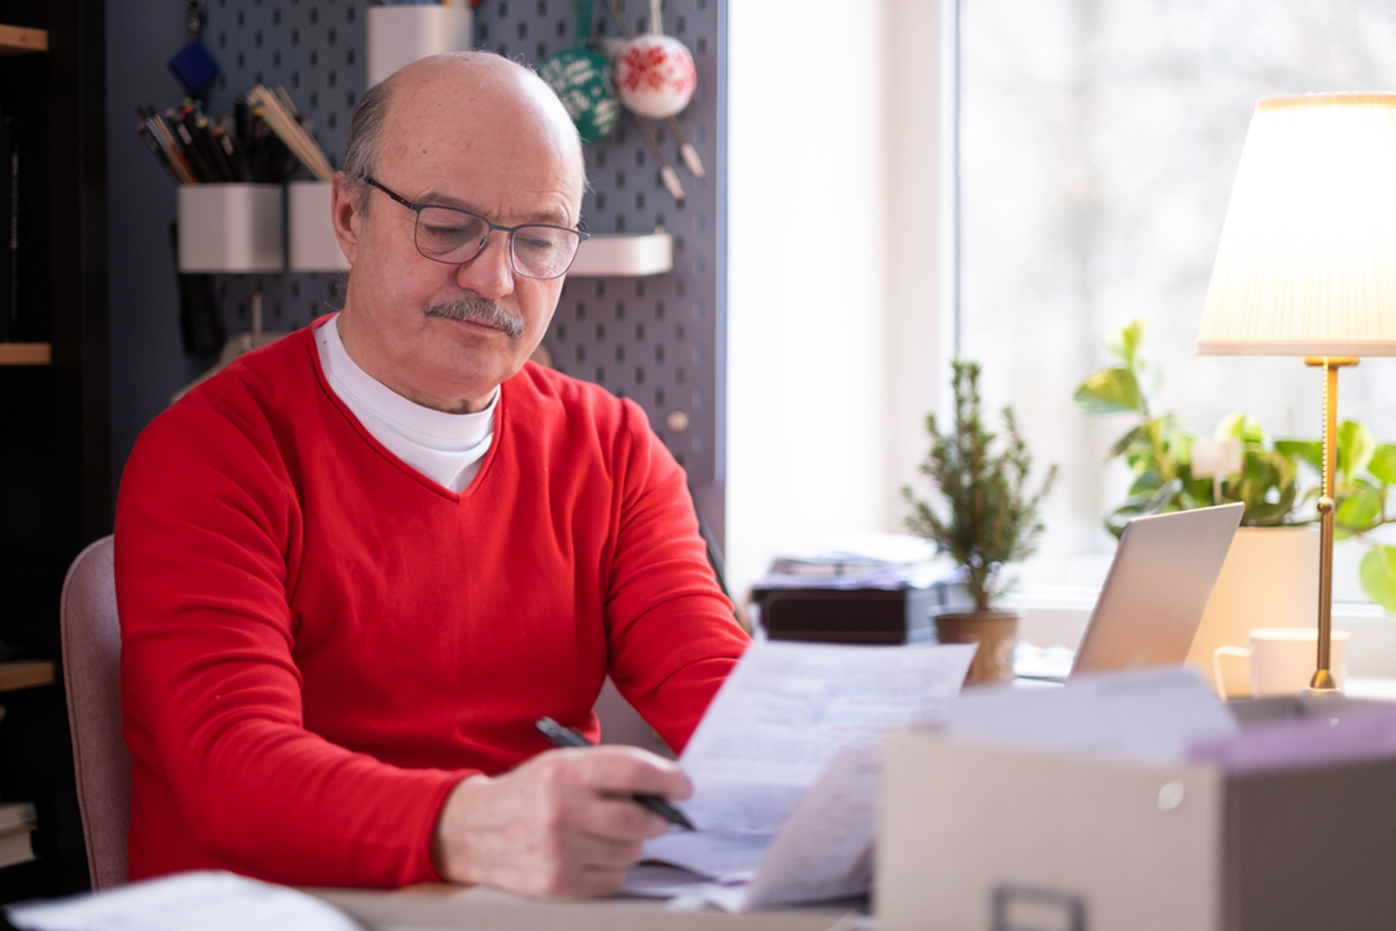 A man wearing a red sweater stares grimly at a stack of forms